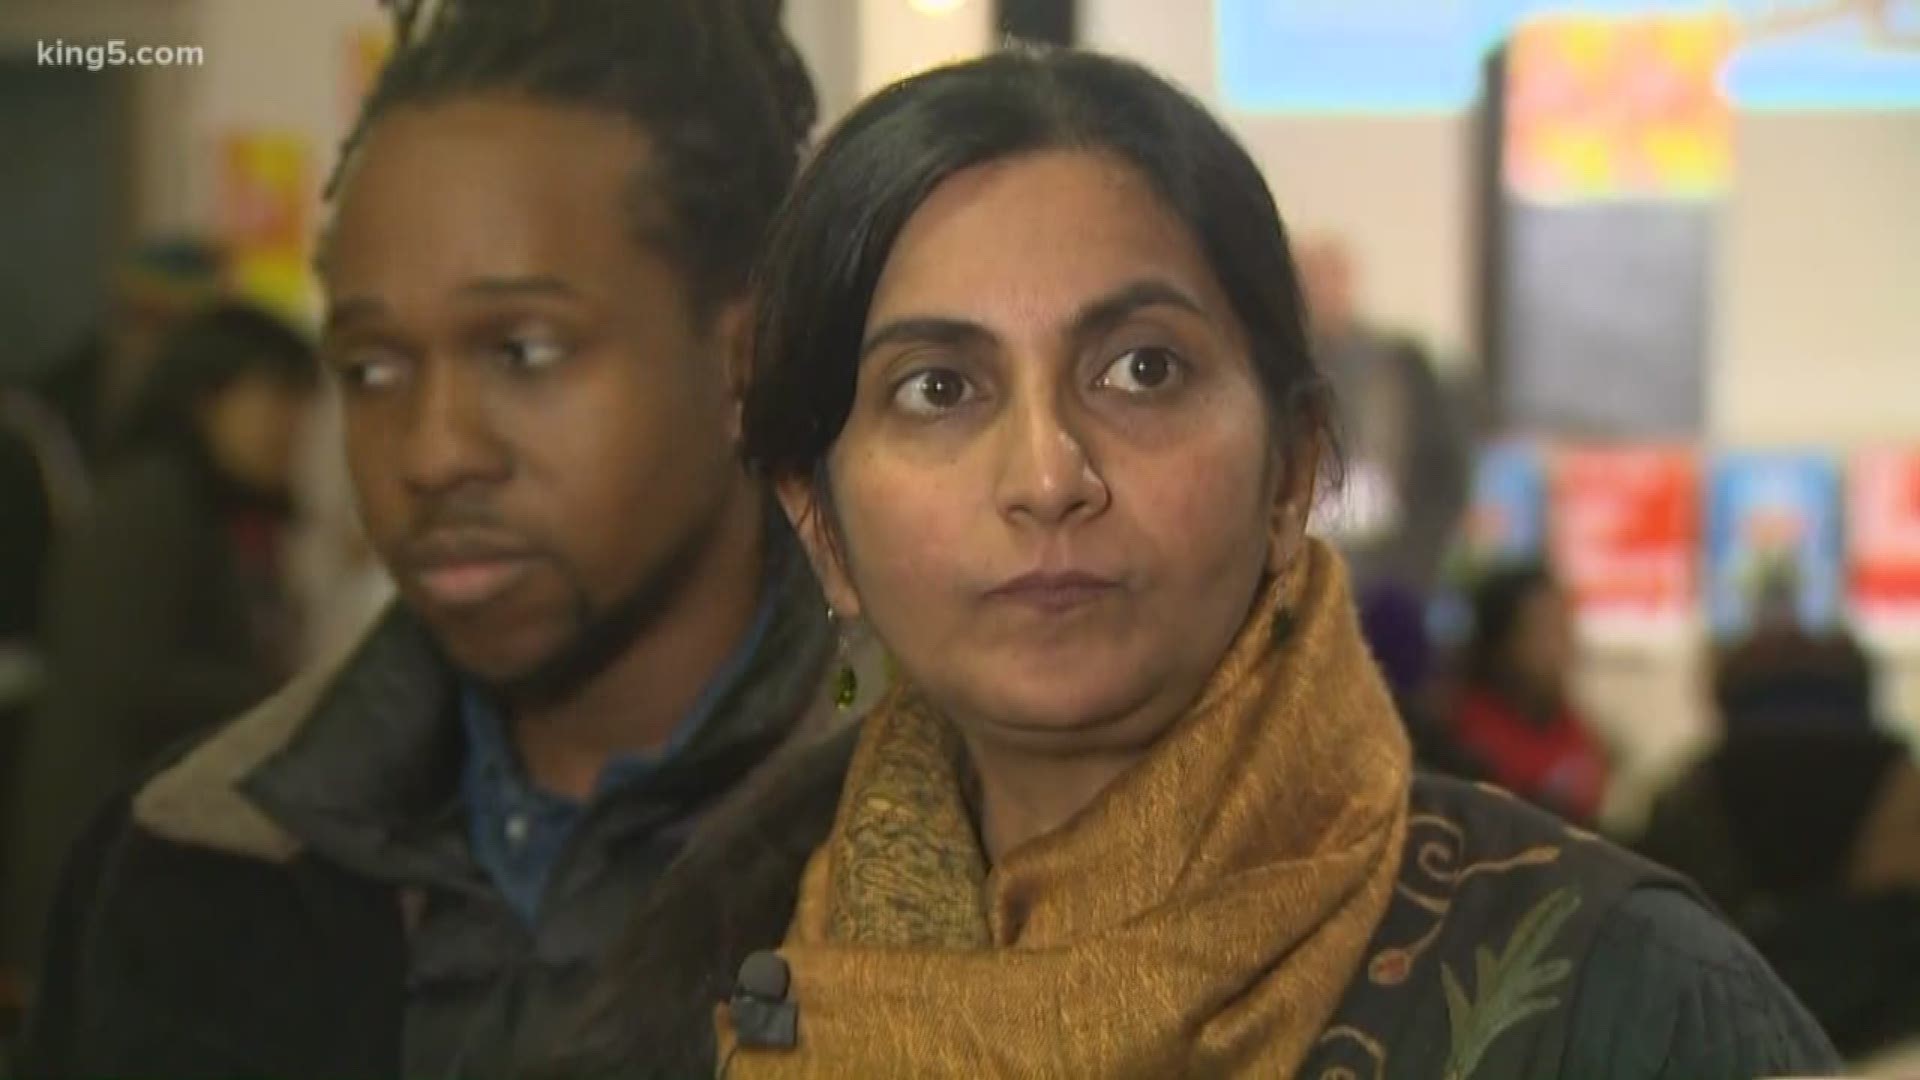 Seattle City Councilmember Kshama Sawant has been sworn in for another term.